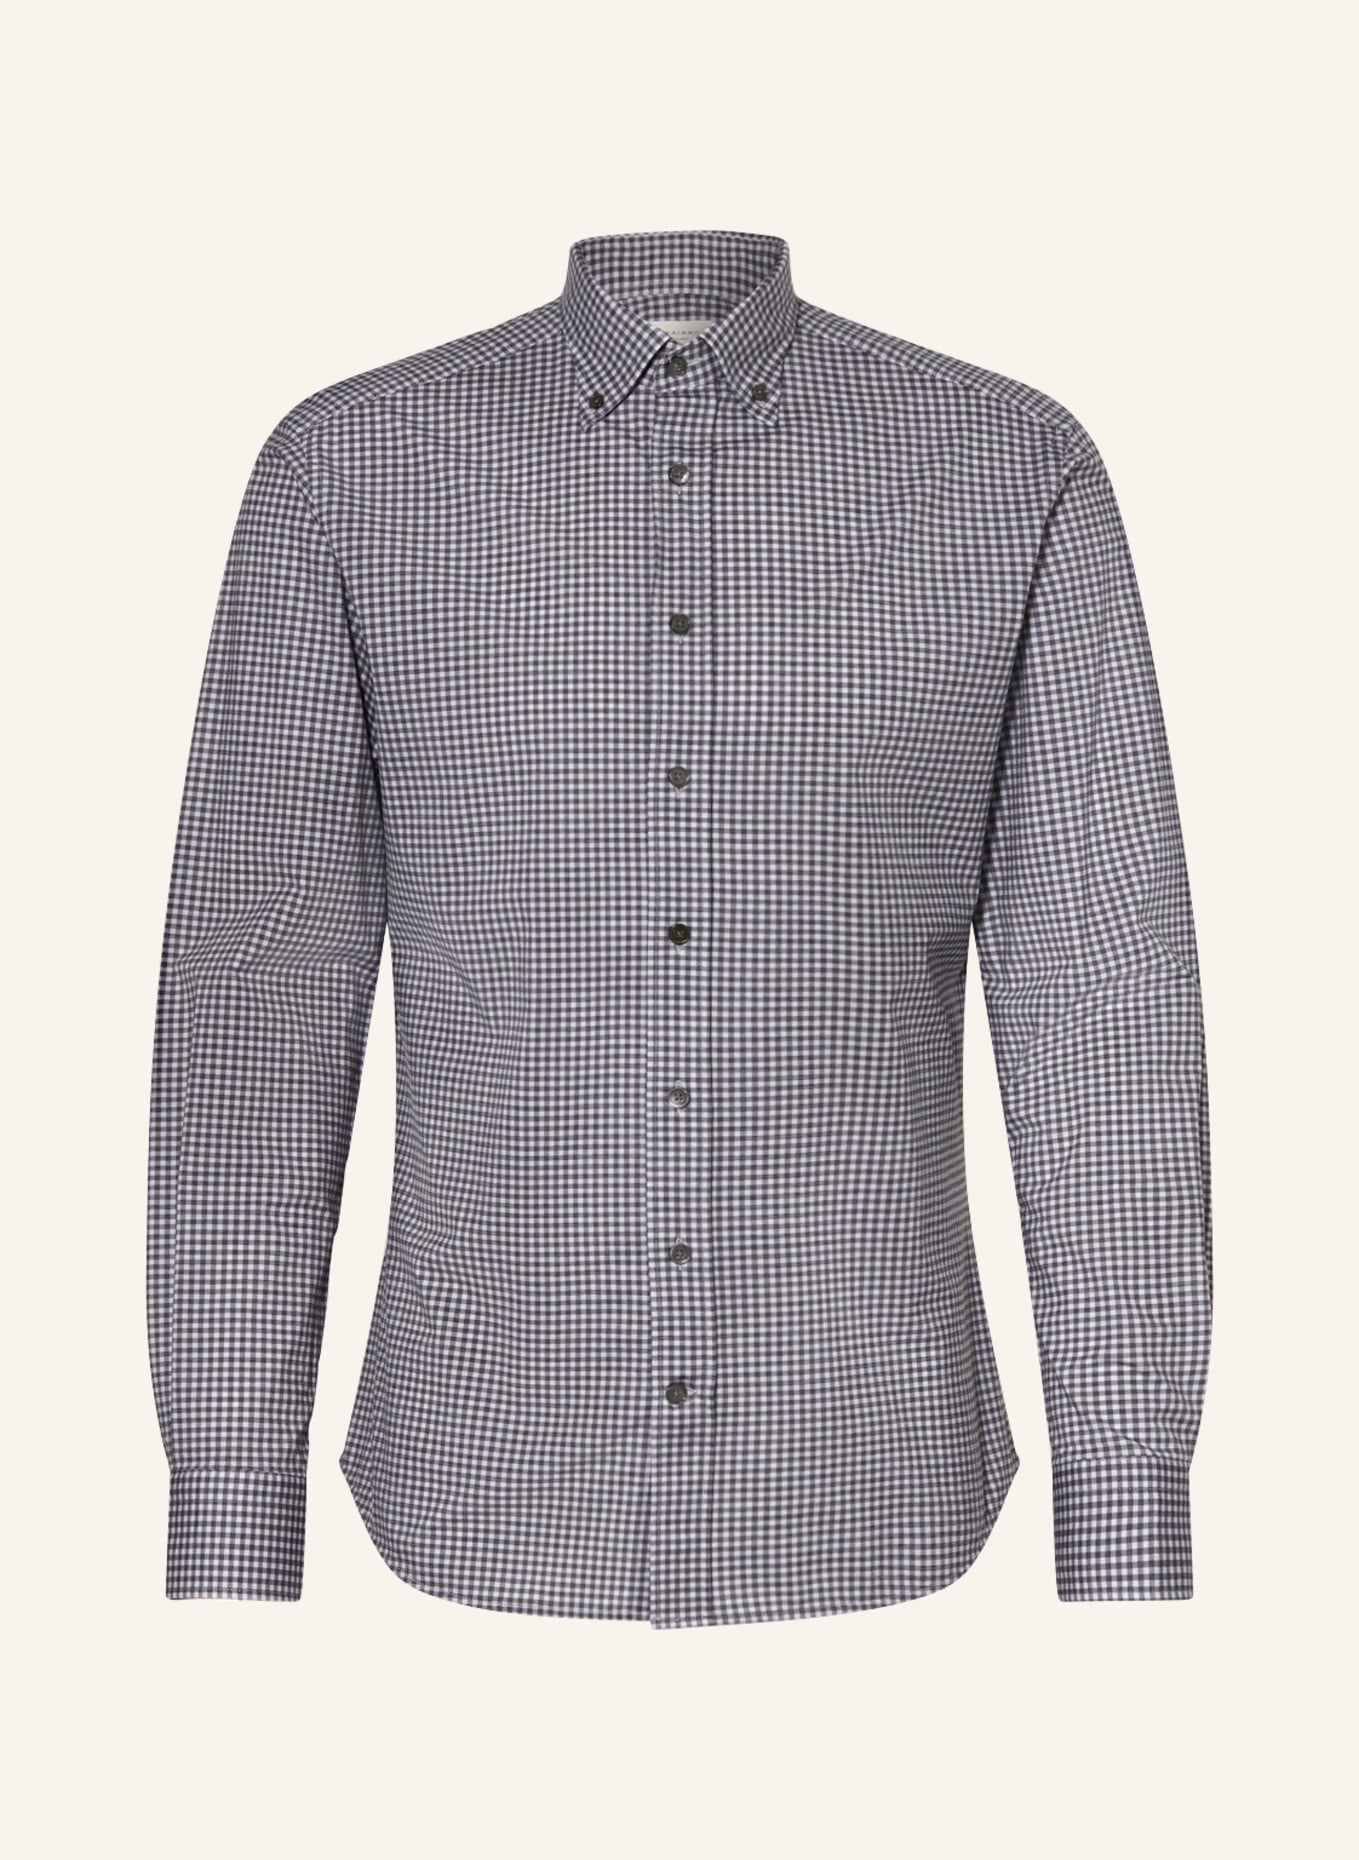 TRAIANO Jersey shirt radical fit, Color: GRAY/ LIGHT GRAY (Image 1)